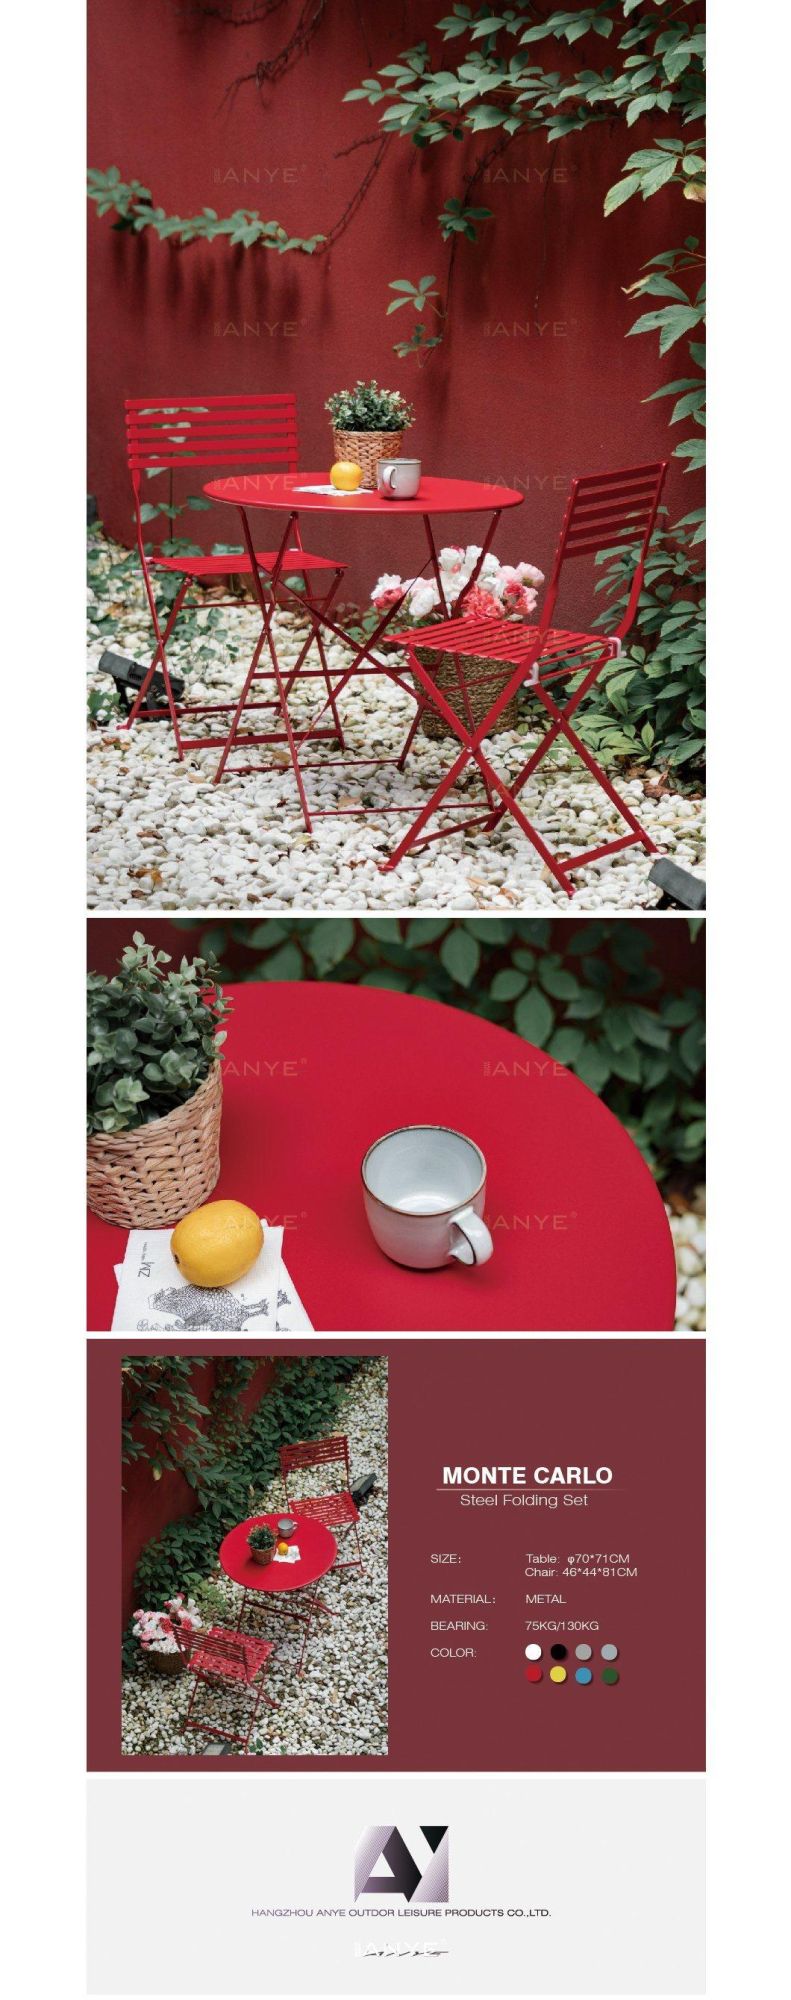 Balcony Furniture Set Rust Resistant Foldable Tea Table and Chair Portable Dining Furniture for Outside